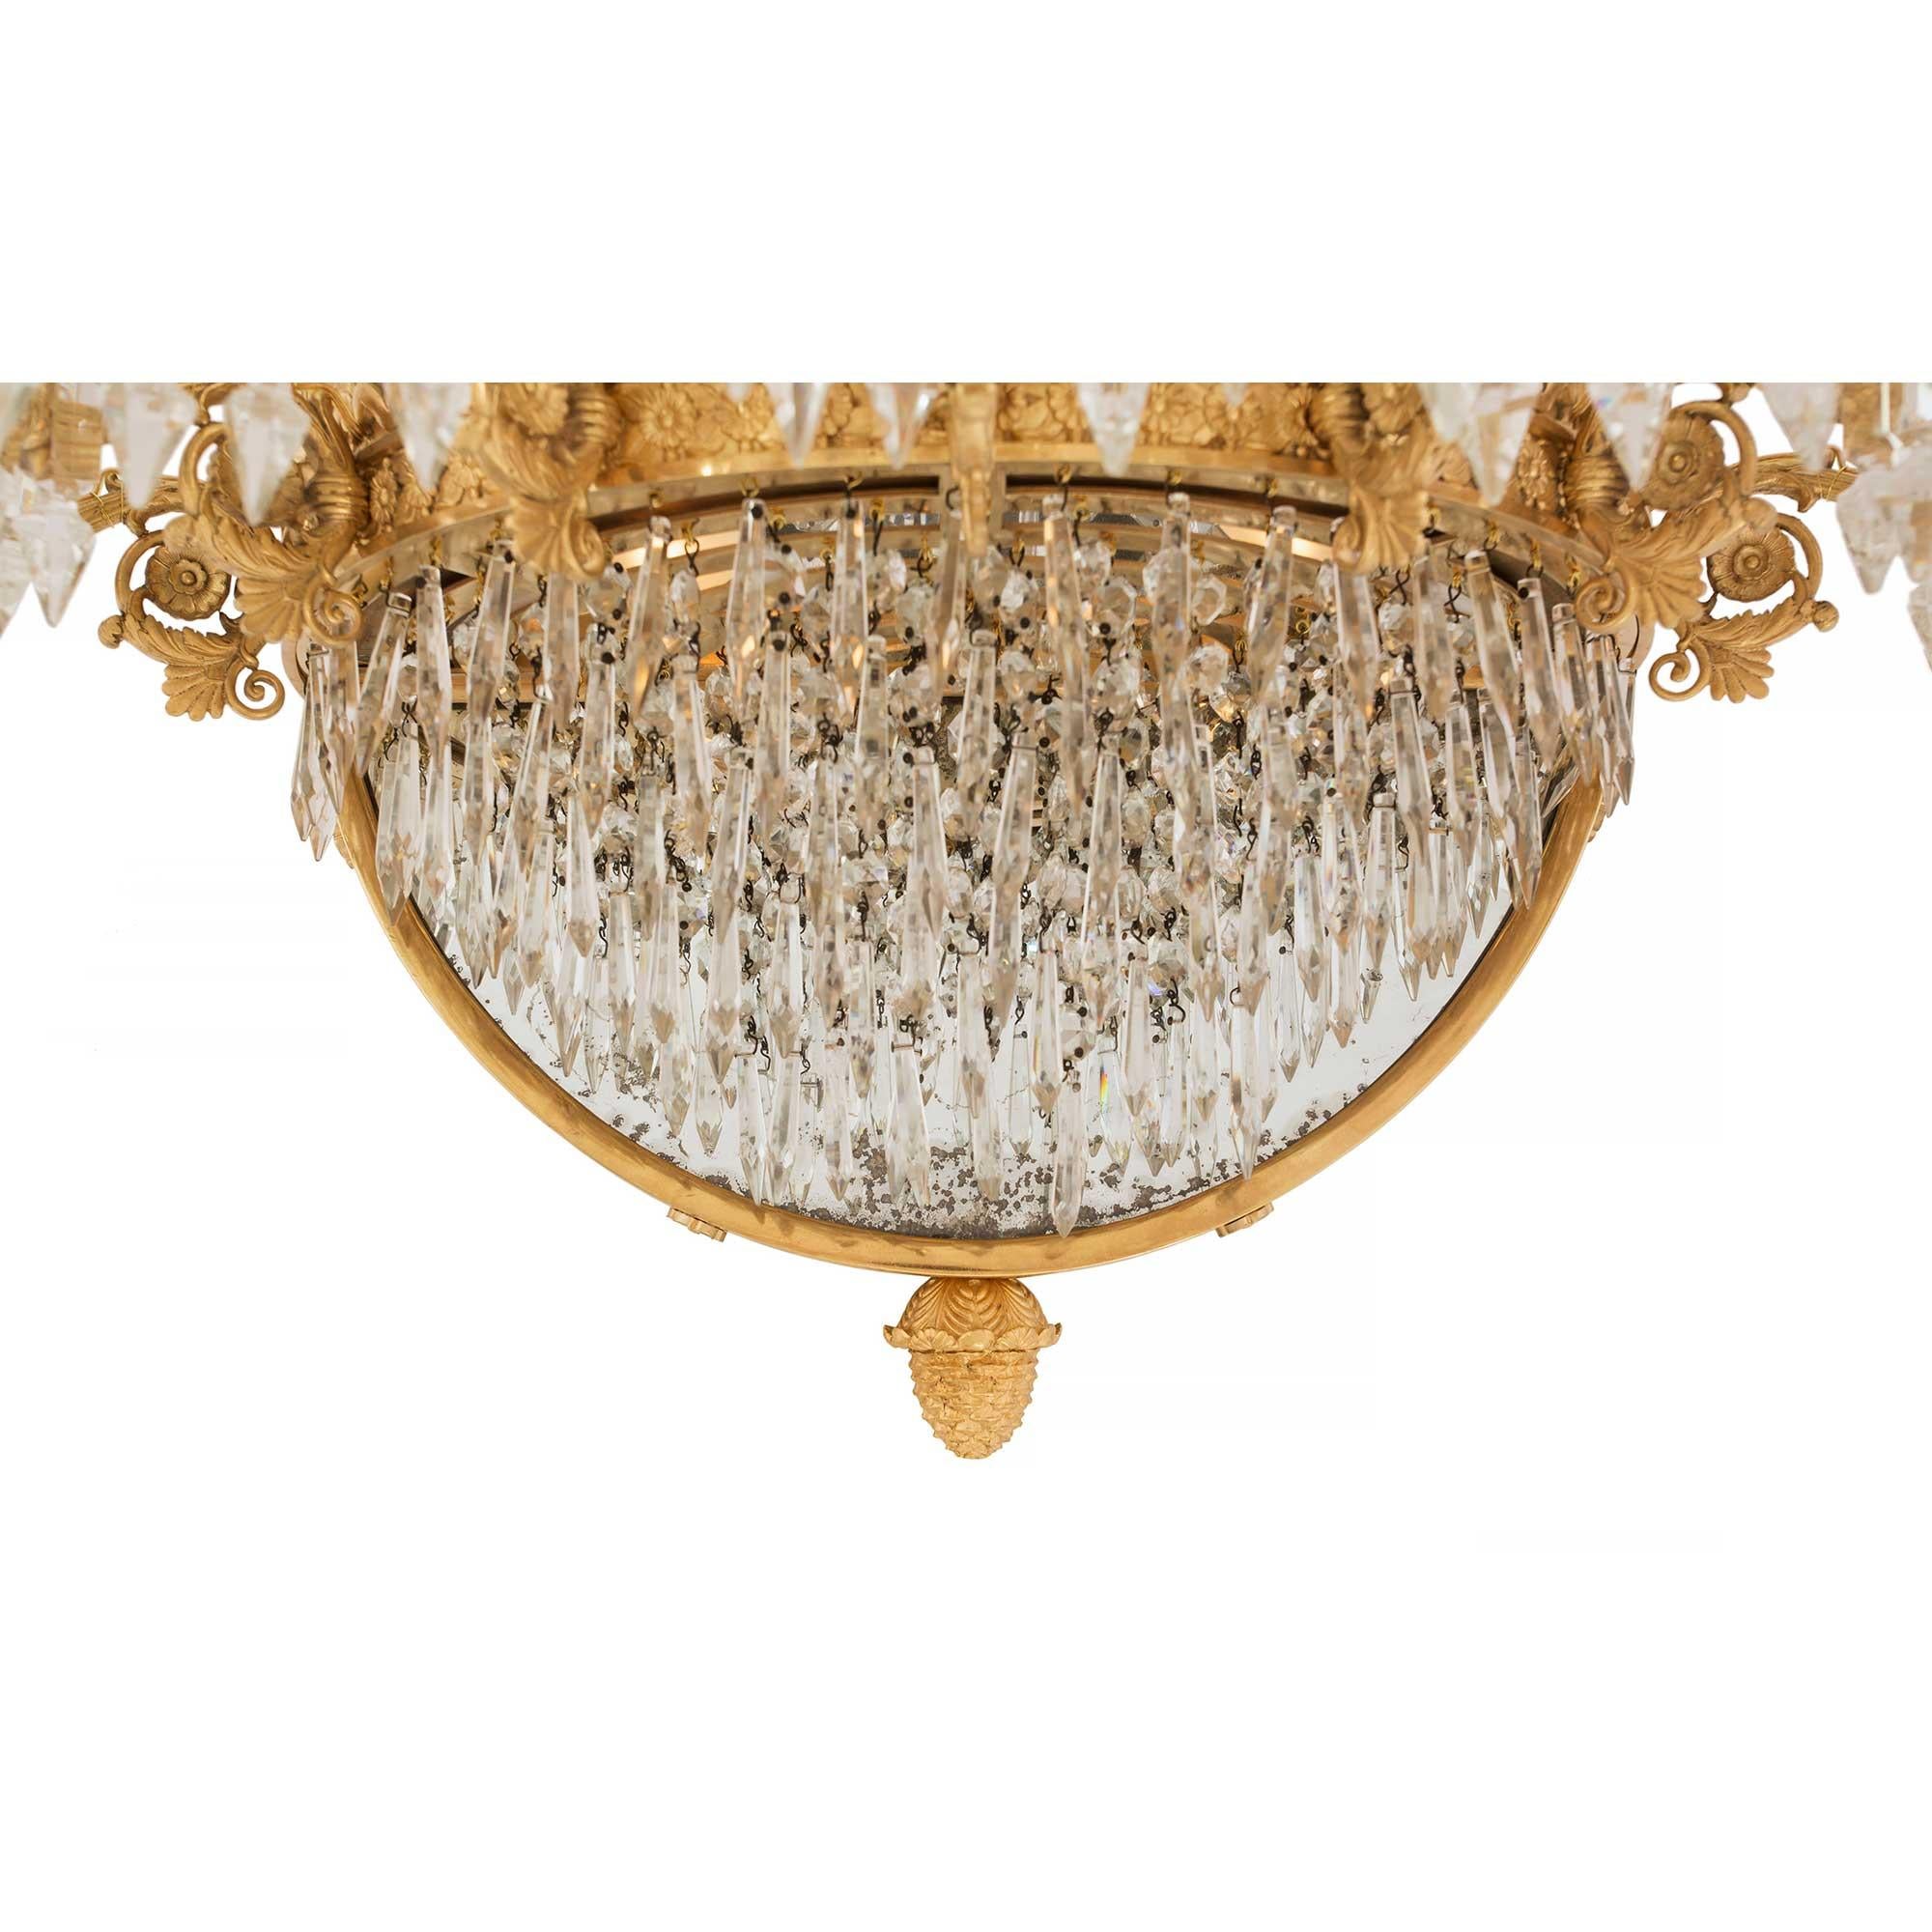 French 19th Century Neoclassical St. Ormolu and Crystal Sconces Signed Baccarat For Sale 4